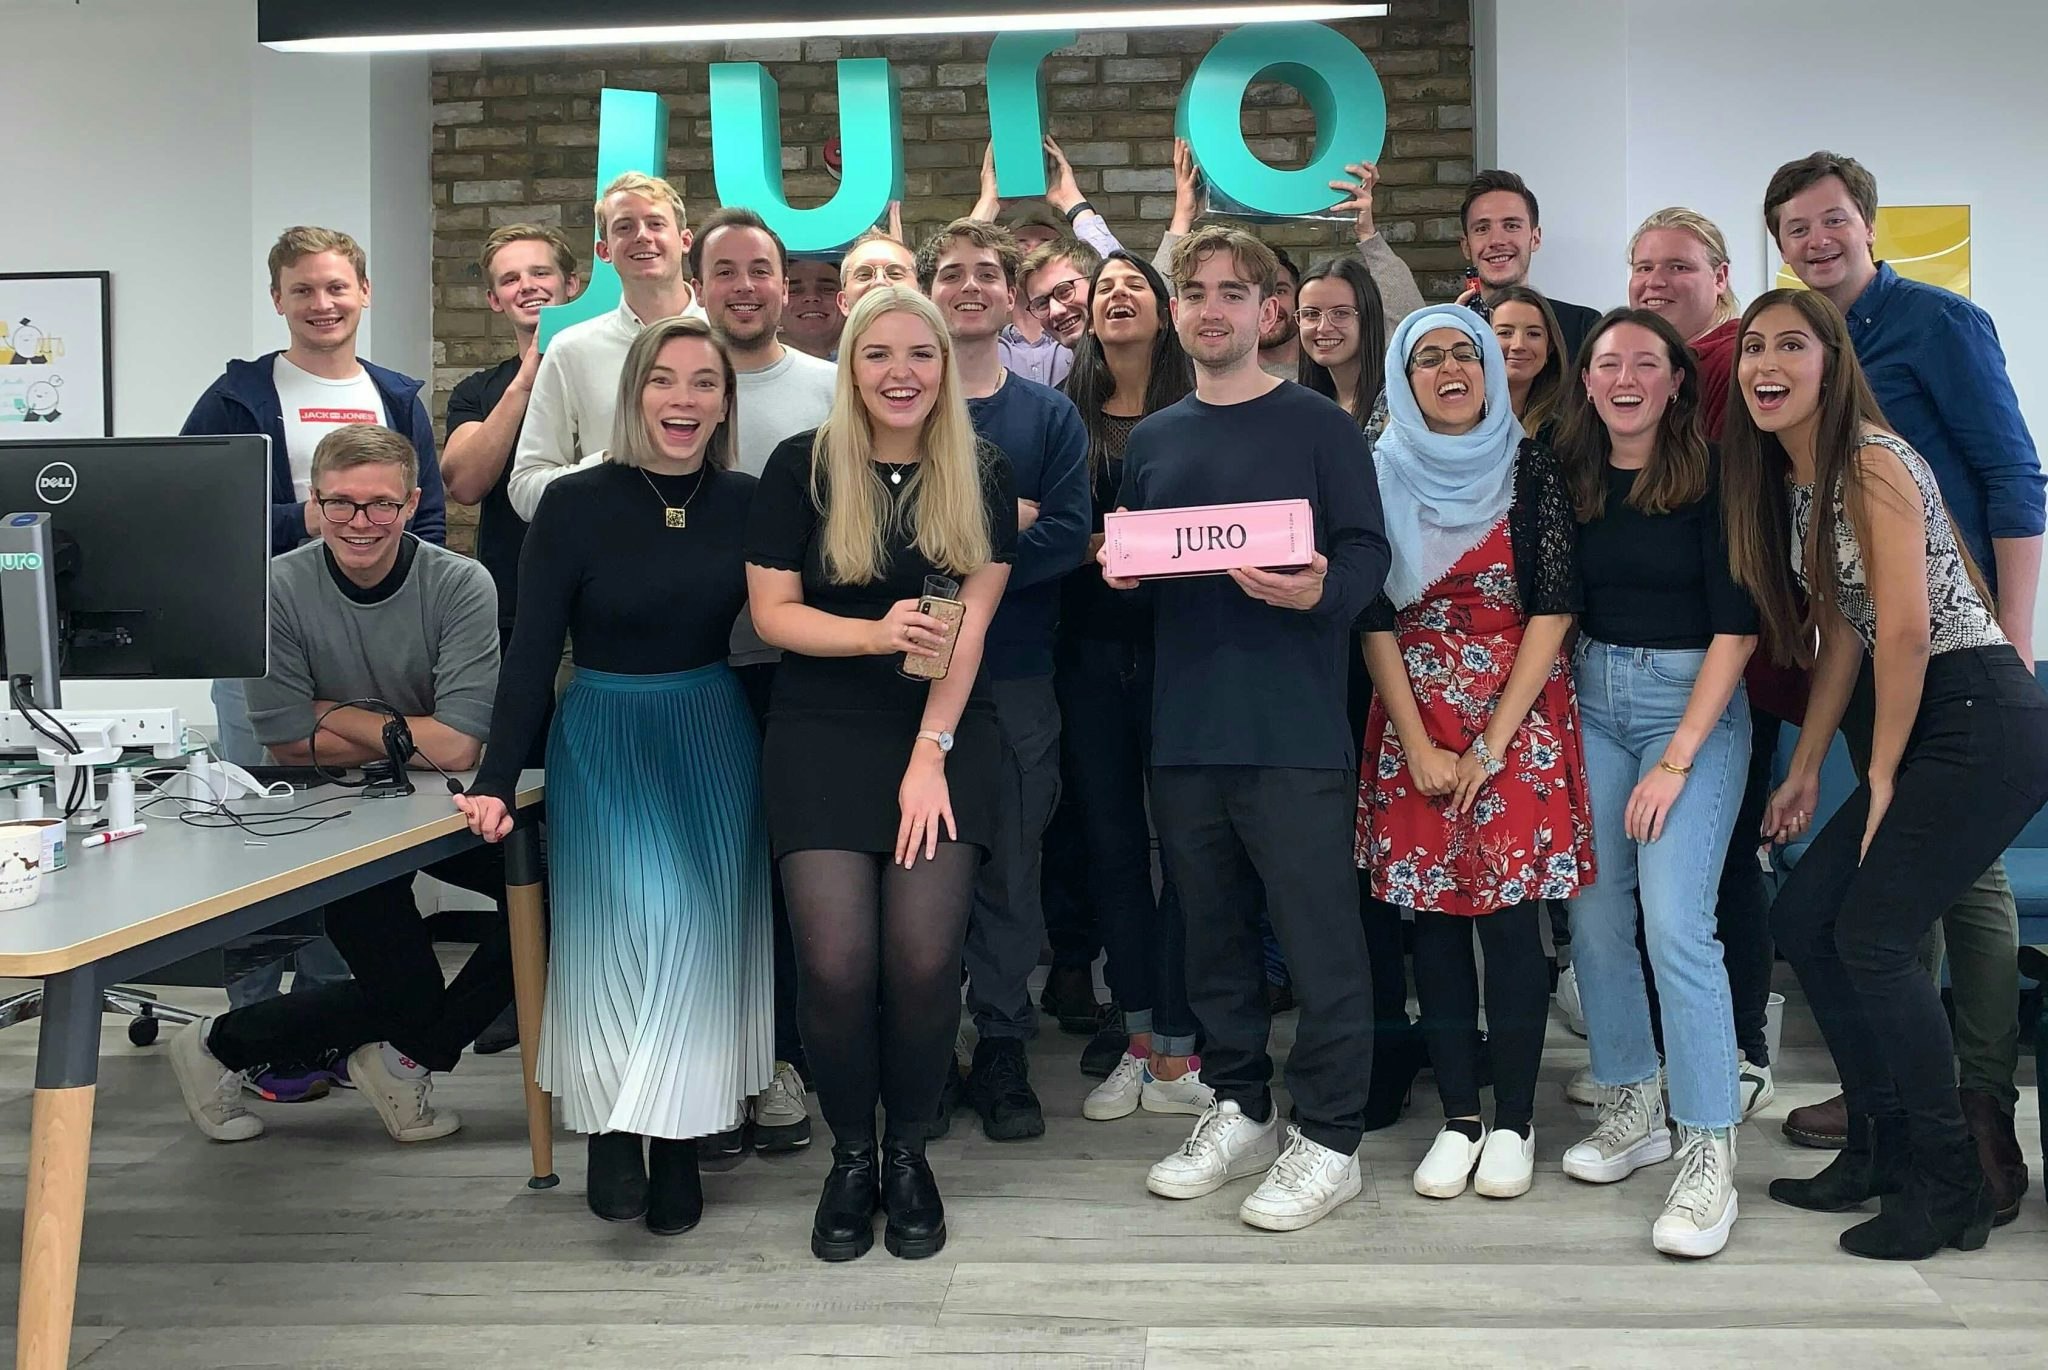 A group photo of the team at contract automation startup Juro